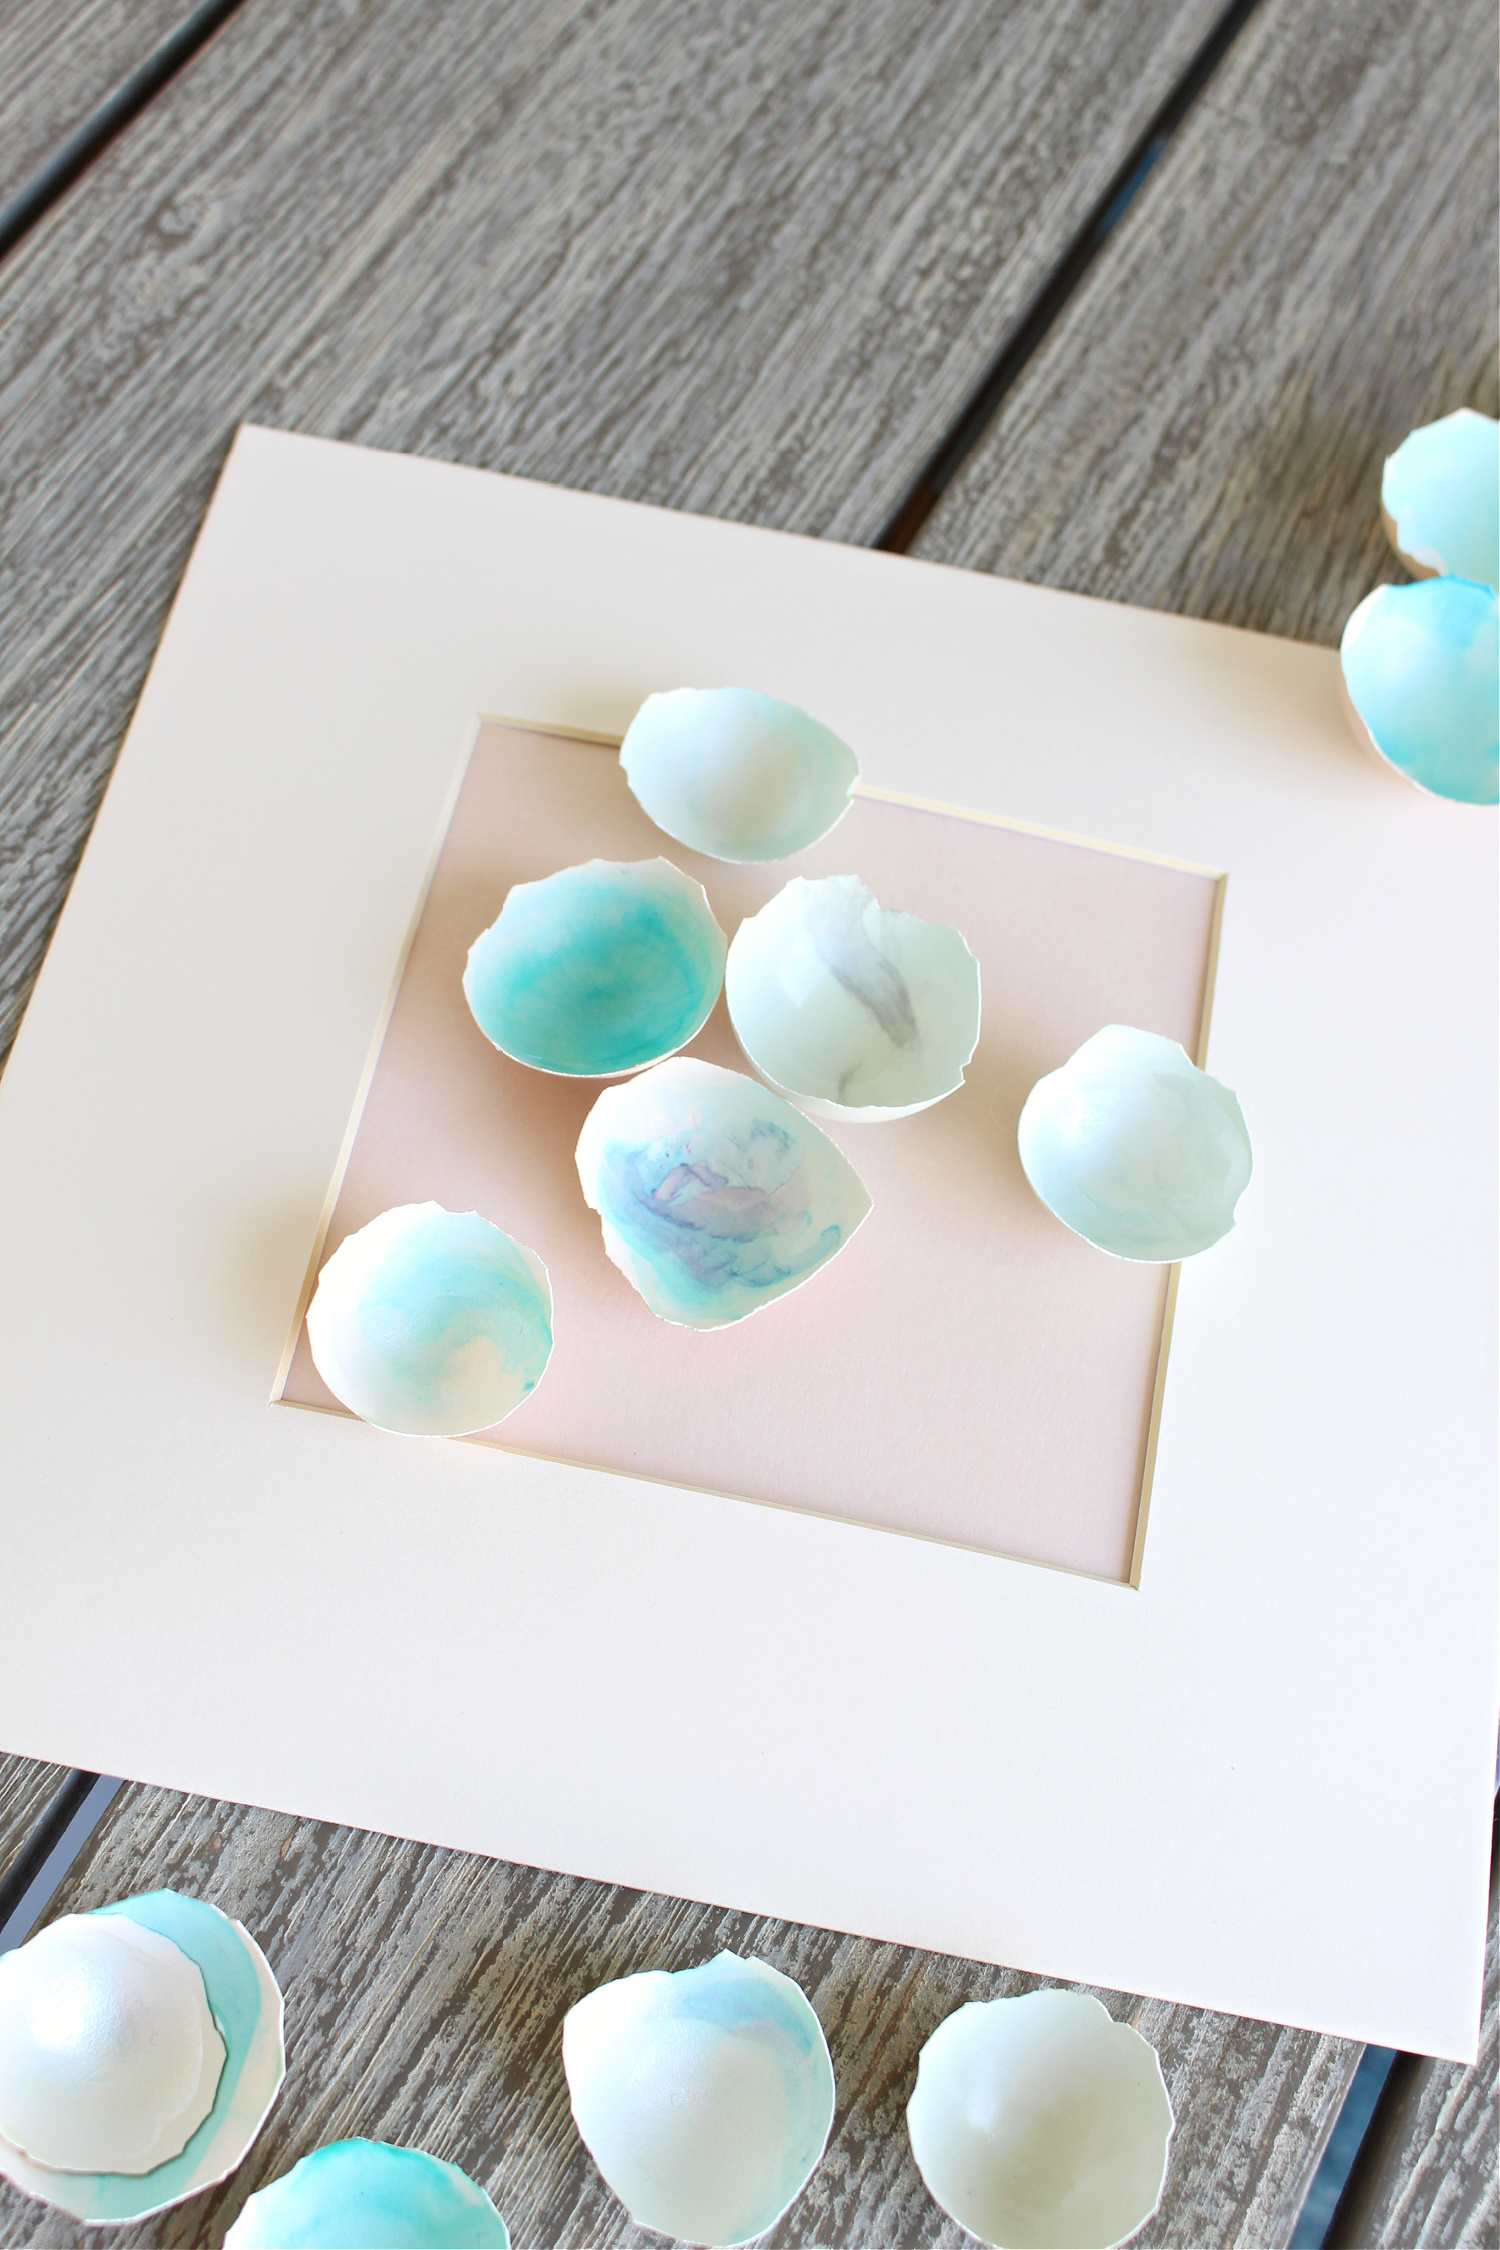 How to Make Painted Egg Shell Art